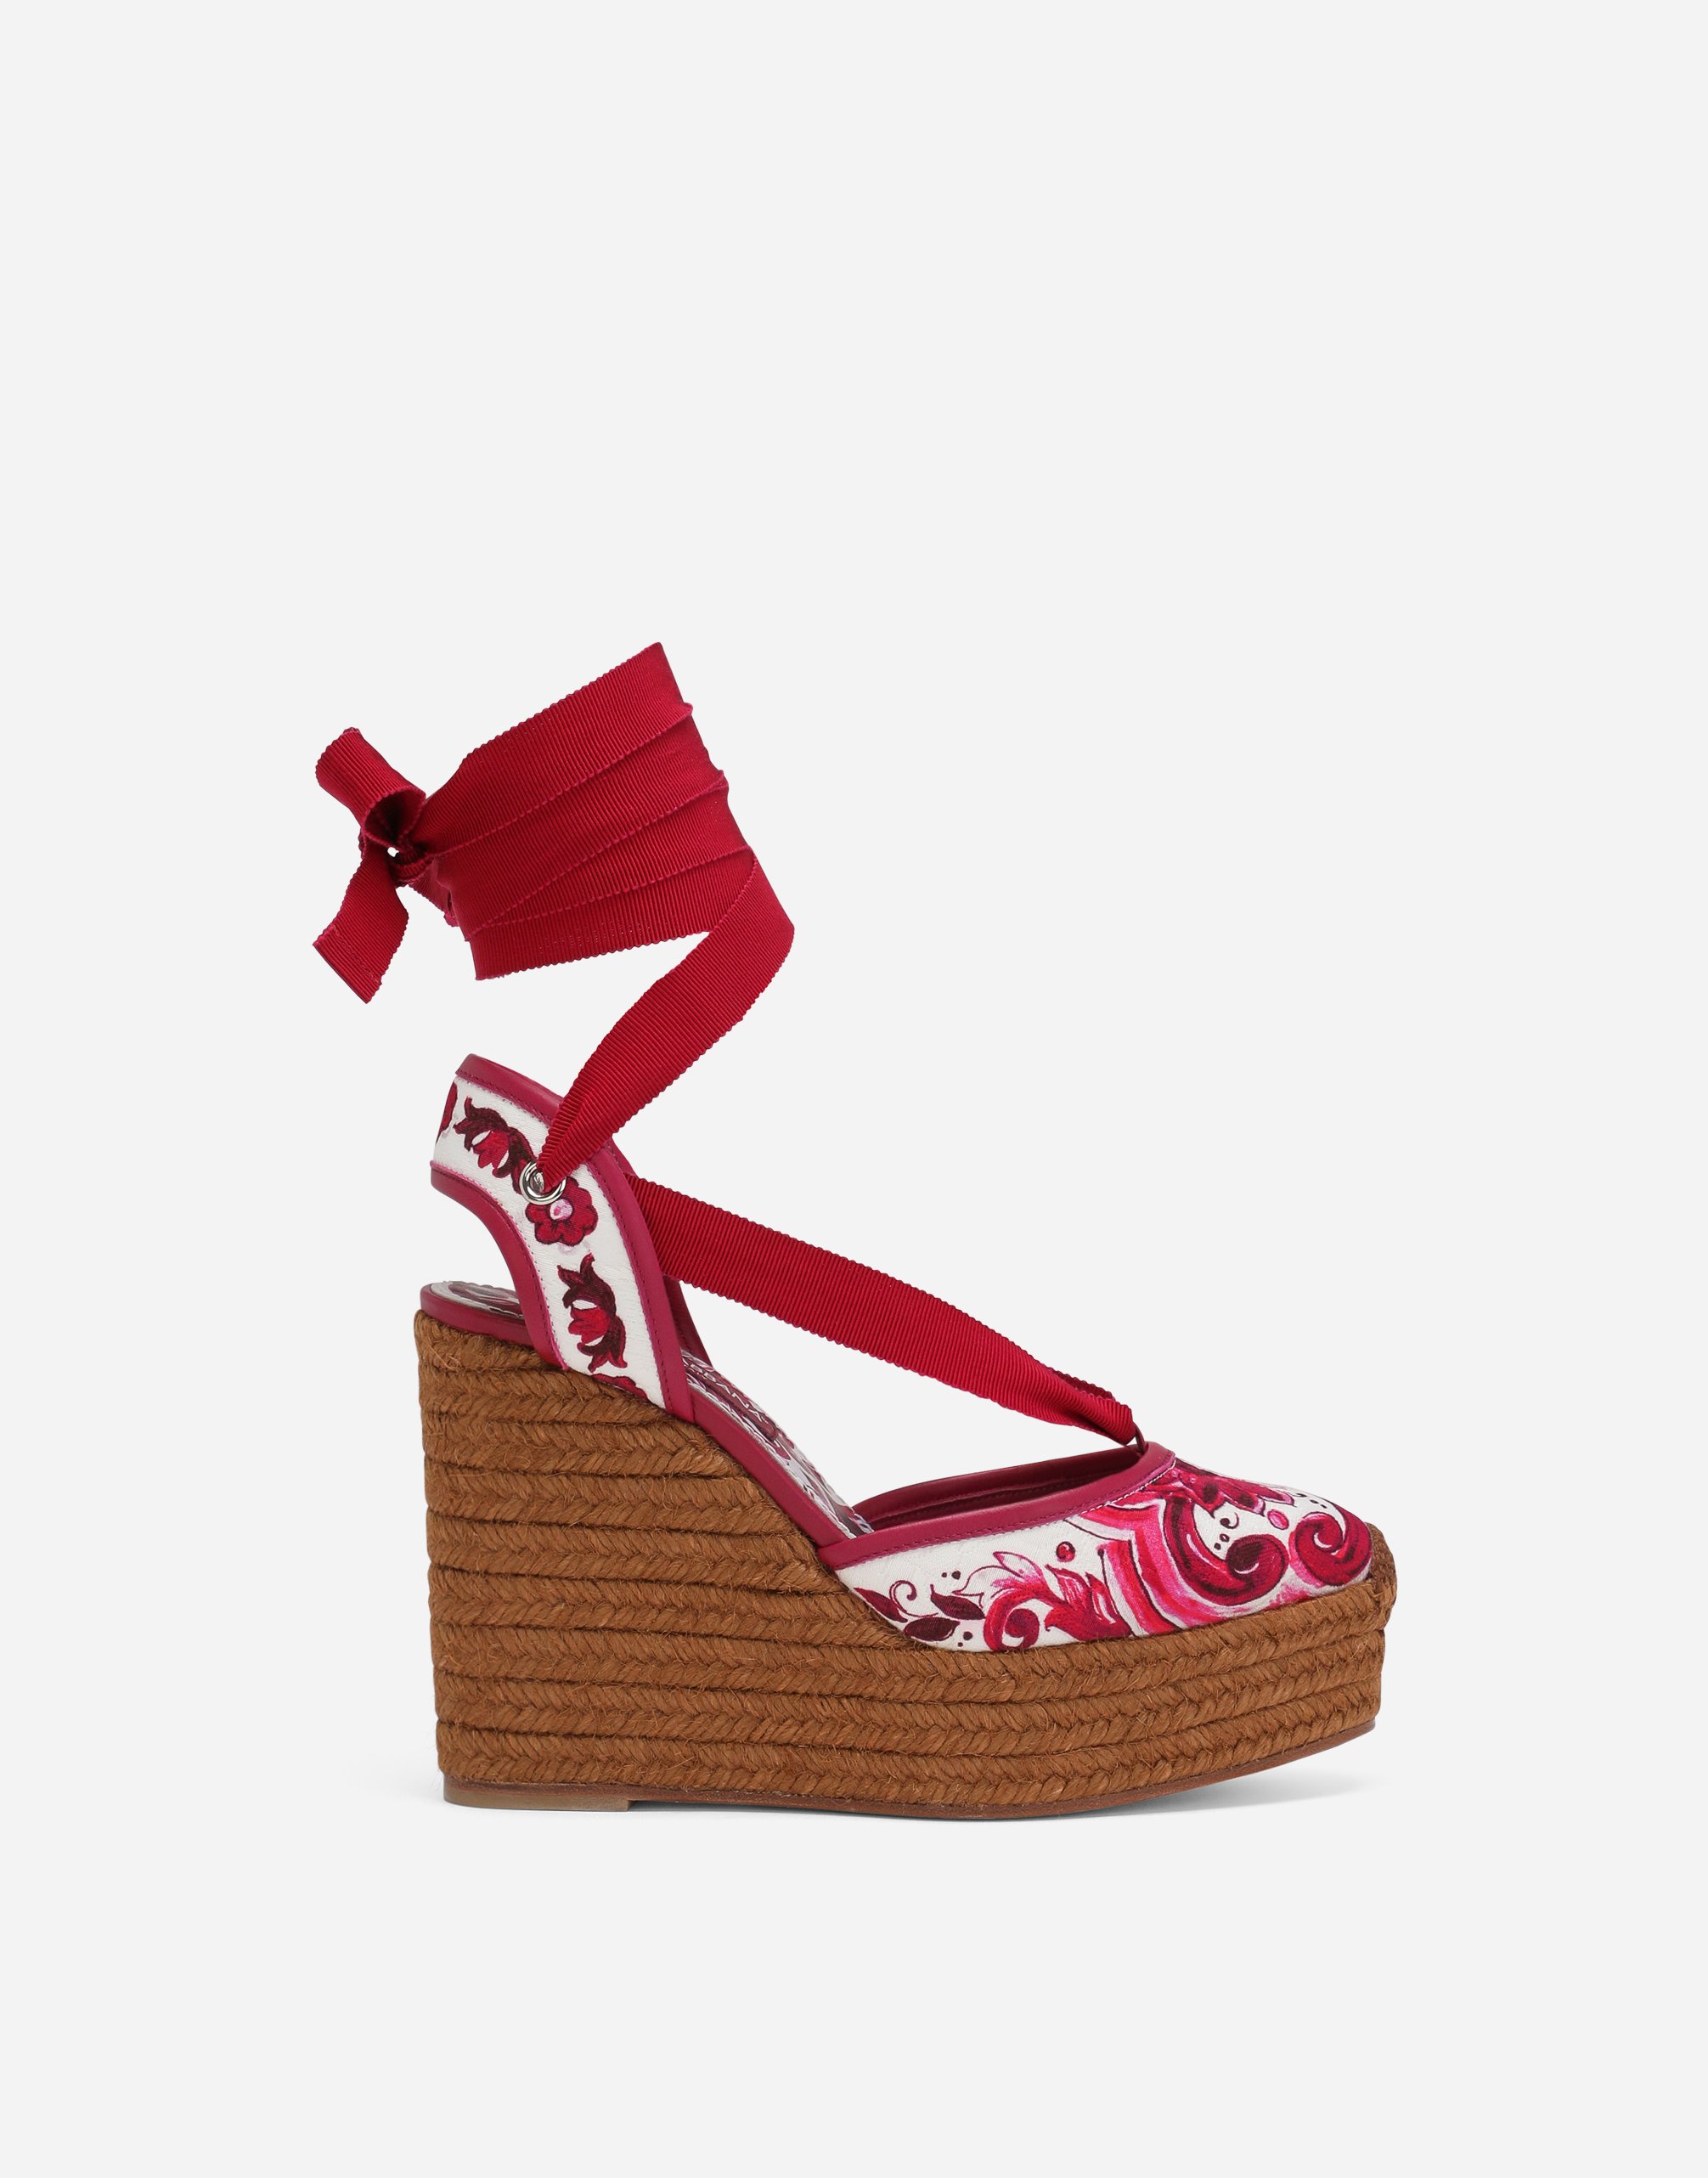 Dolce & Gabbana Printed Brocade Fabric Wedge Sandals In Multicolor